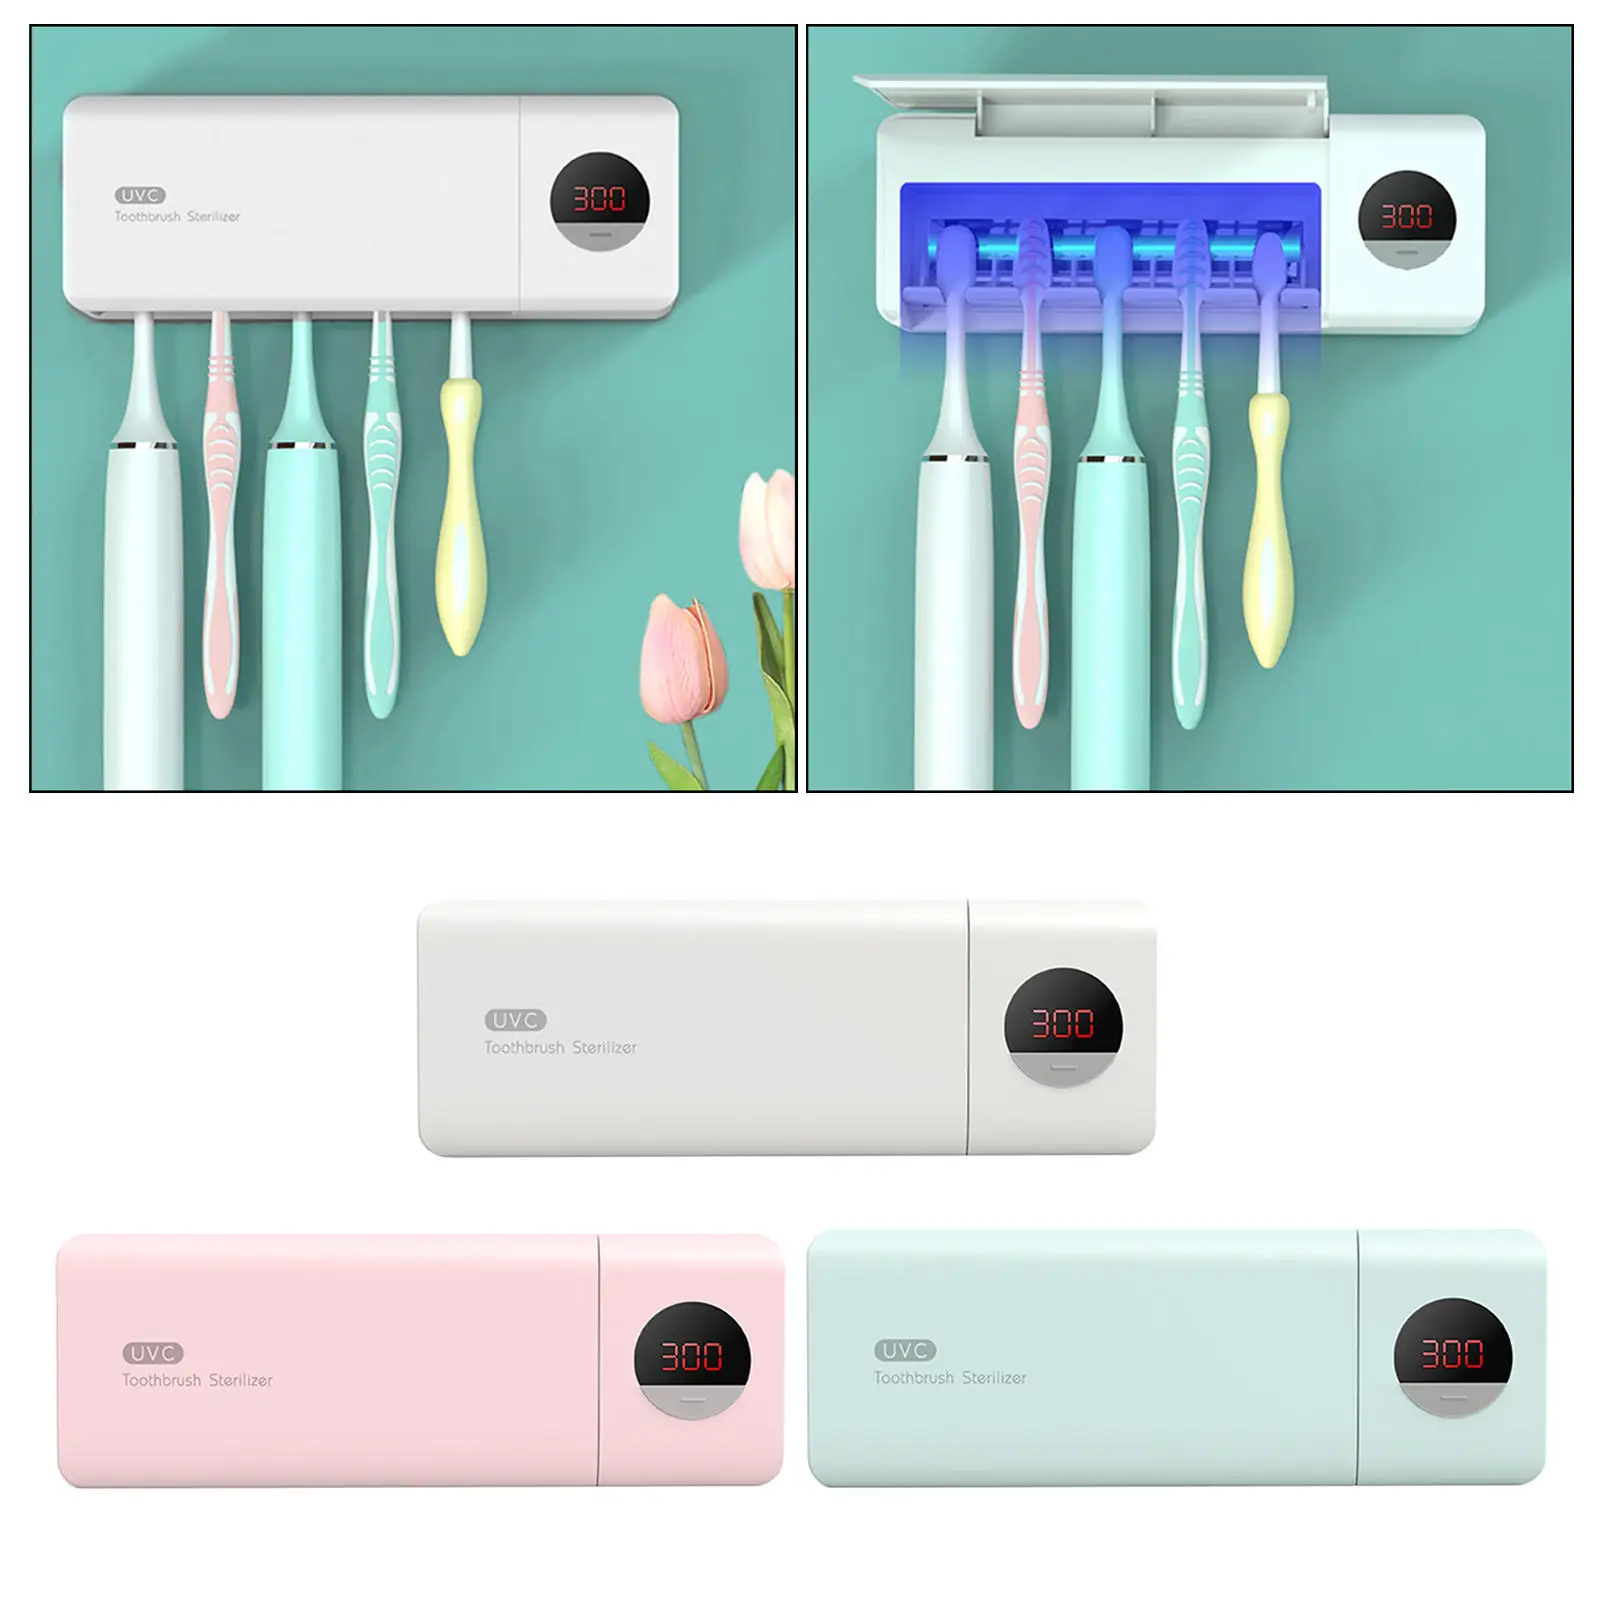 Smart Toothbrush Sanitizer UV Disinfection Bathroom Toothbrush Holder 5 Slots Drilling-Free Rechargeable Sterilizer Organizer